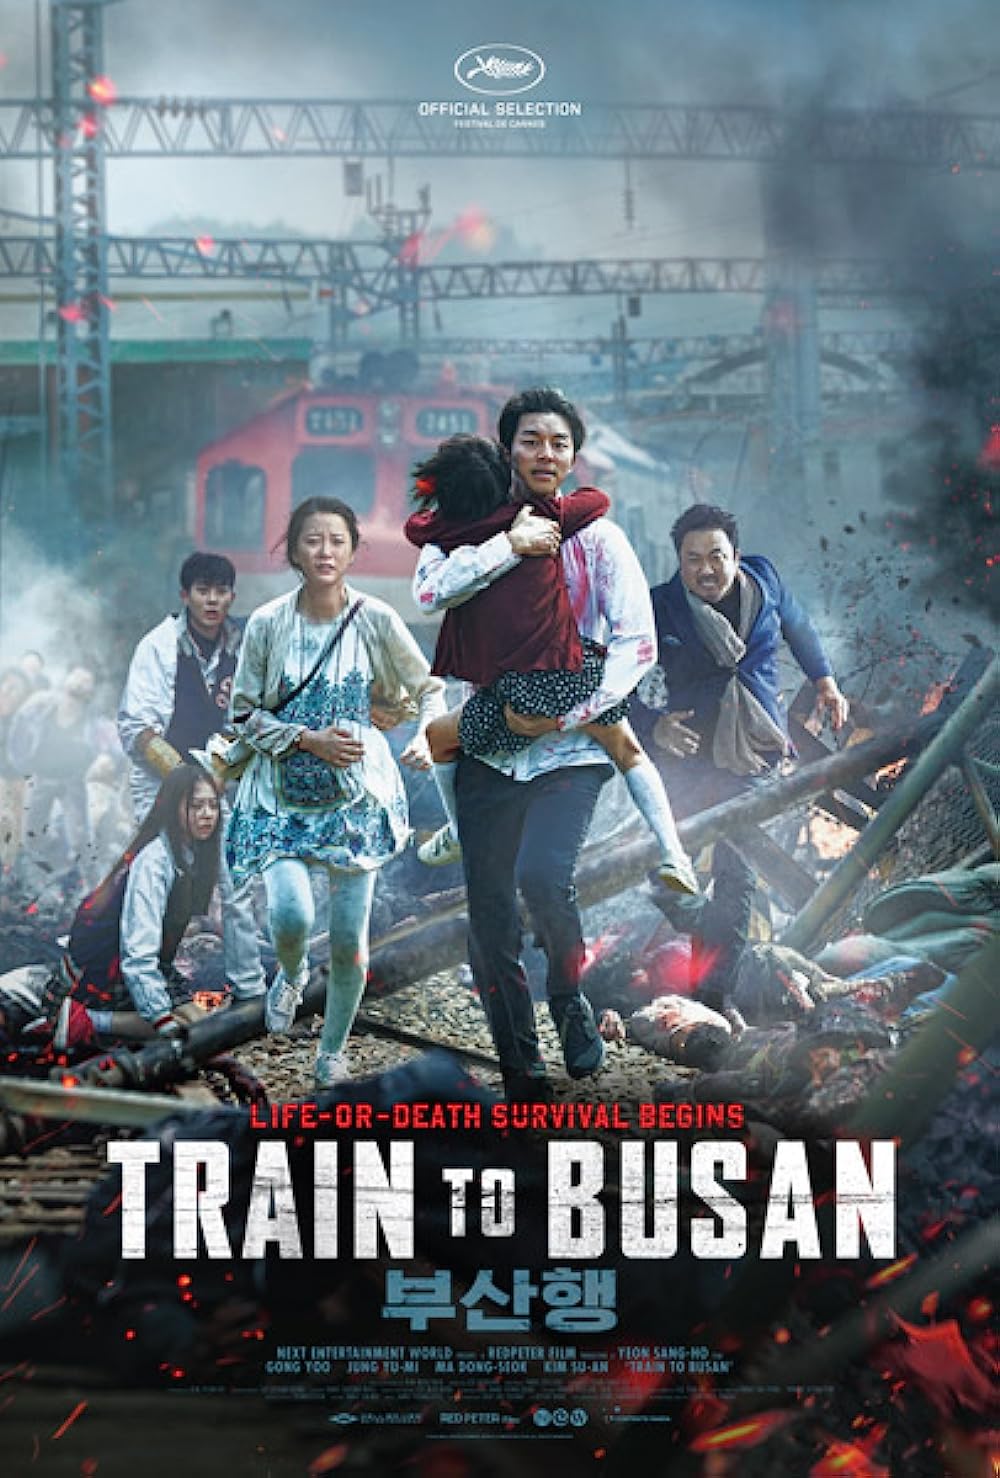 Train To Busan best horror movies on amazon prime